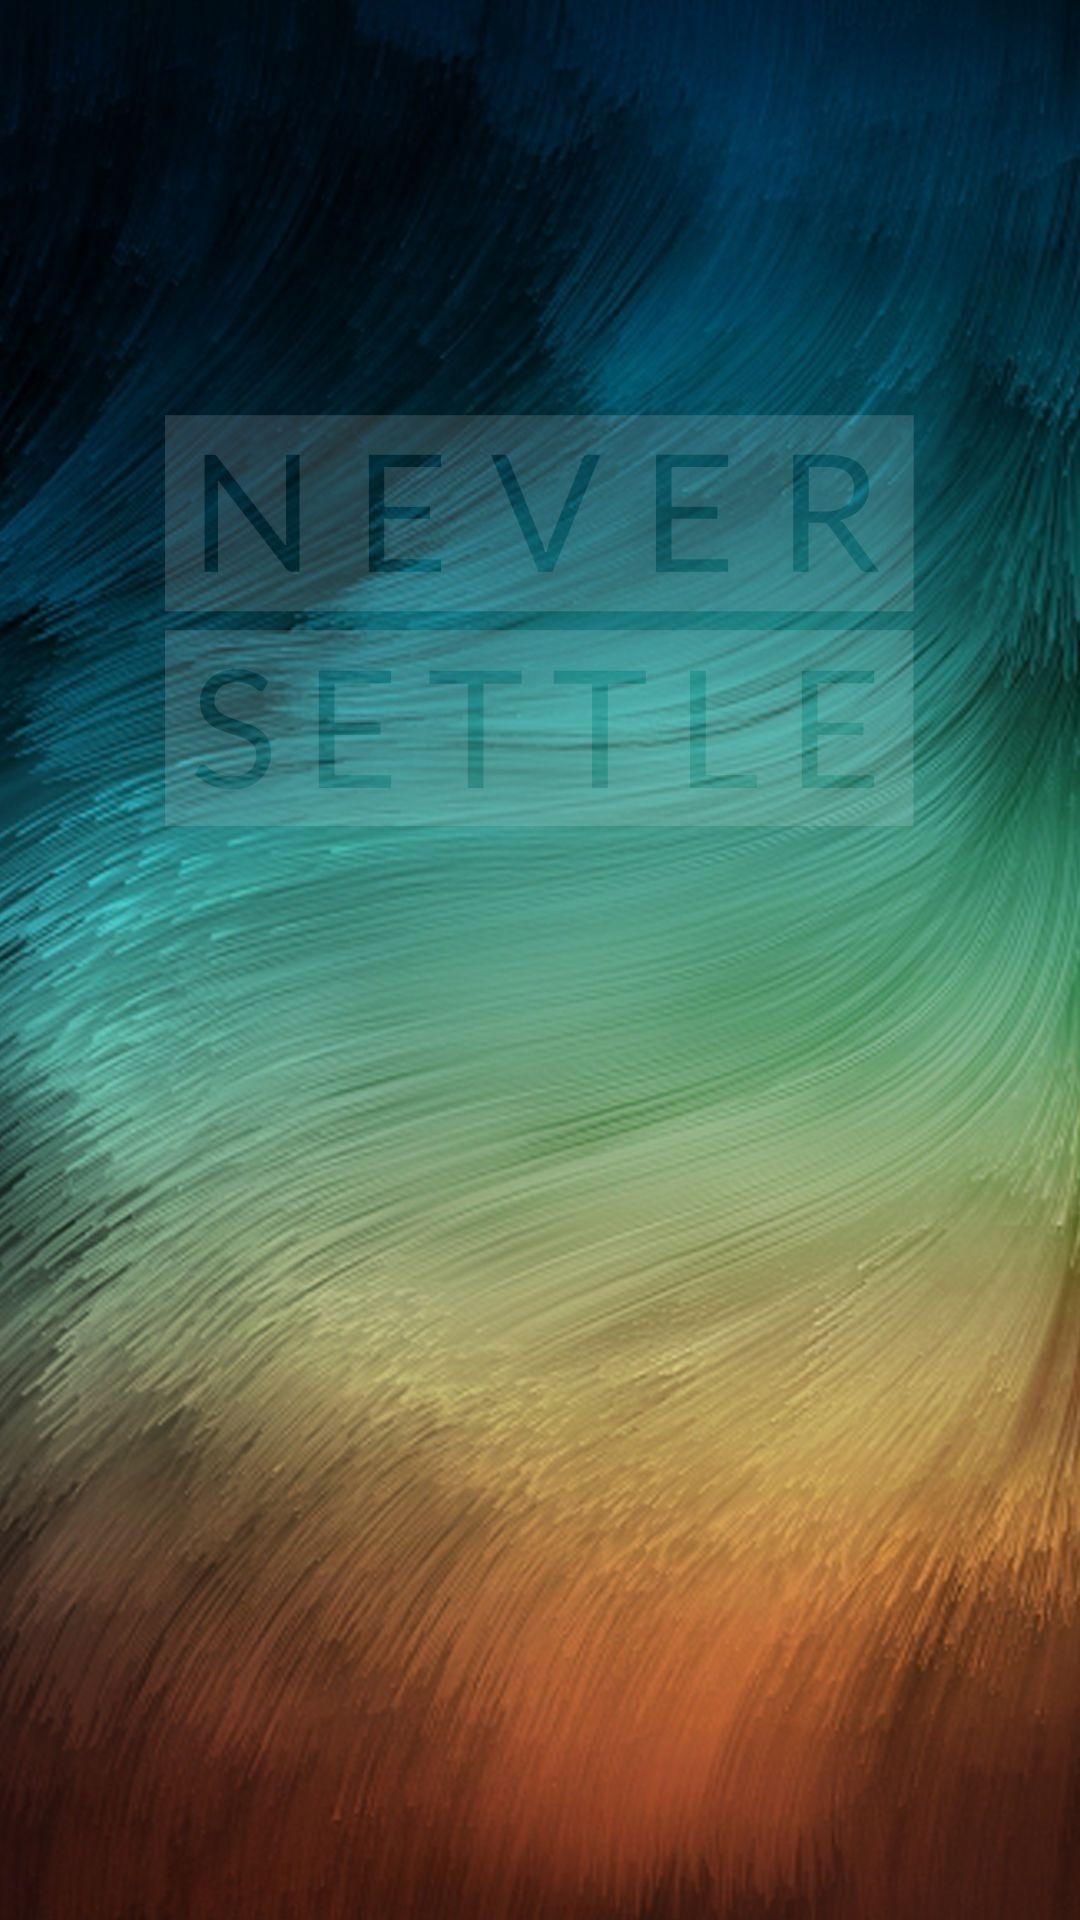 MIUI v6 Never Settle wallpaper for [Oneplus One]